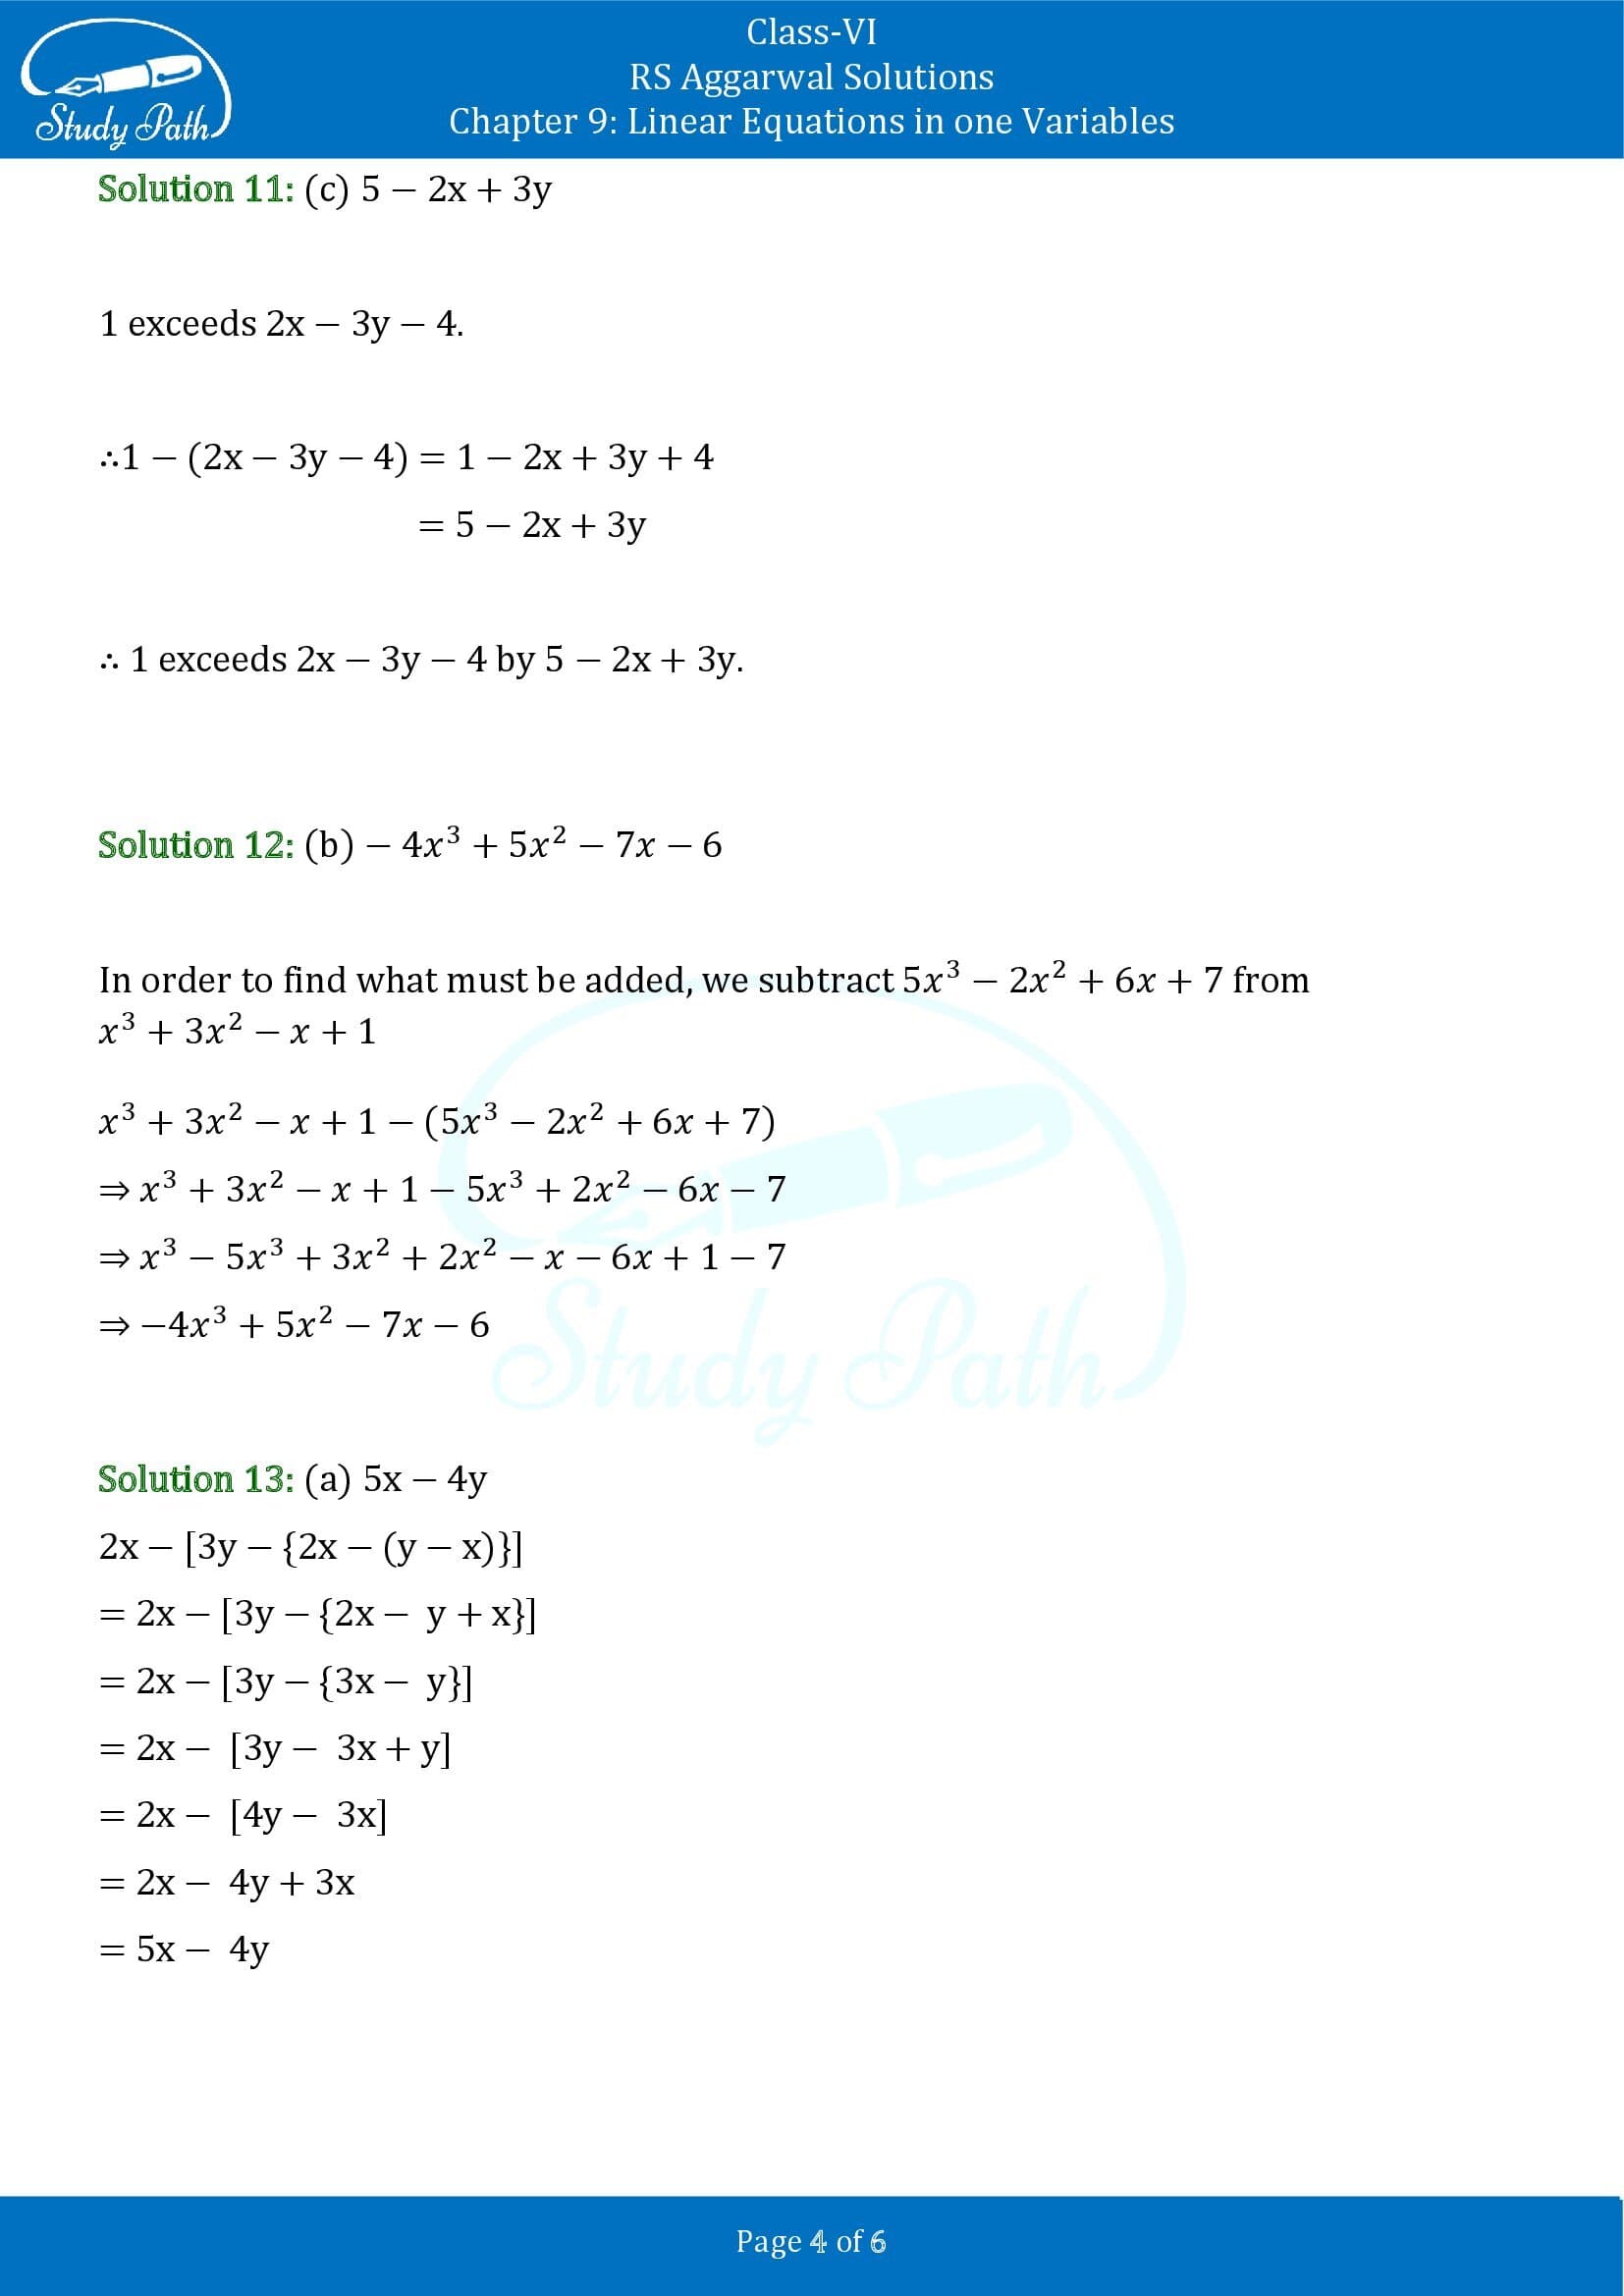 RS Aggarwal Solutions Class 6 Chapter 9 Linear Equations in One Variable Test Paper 00004